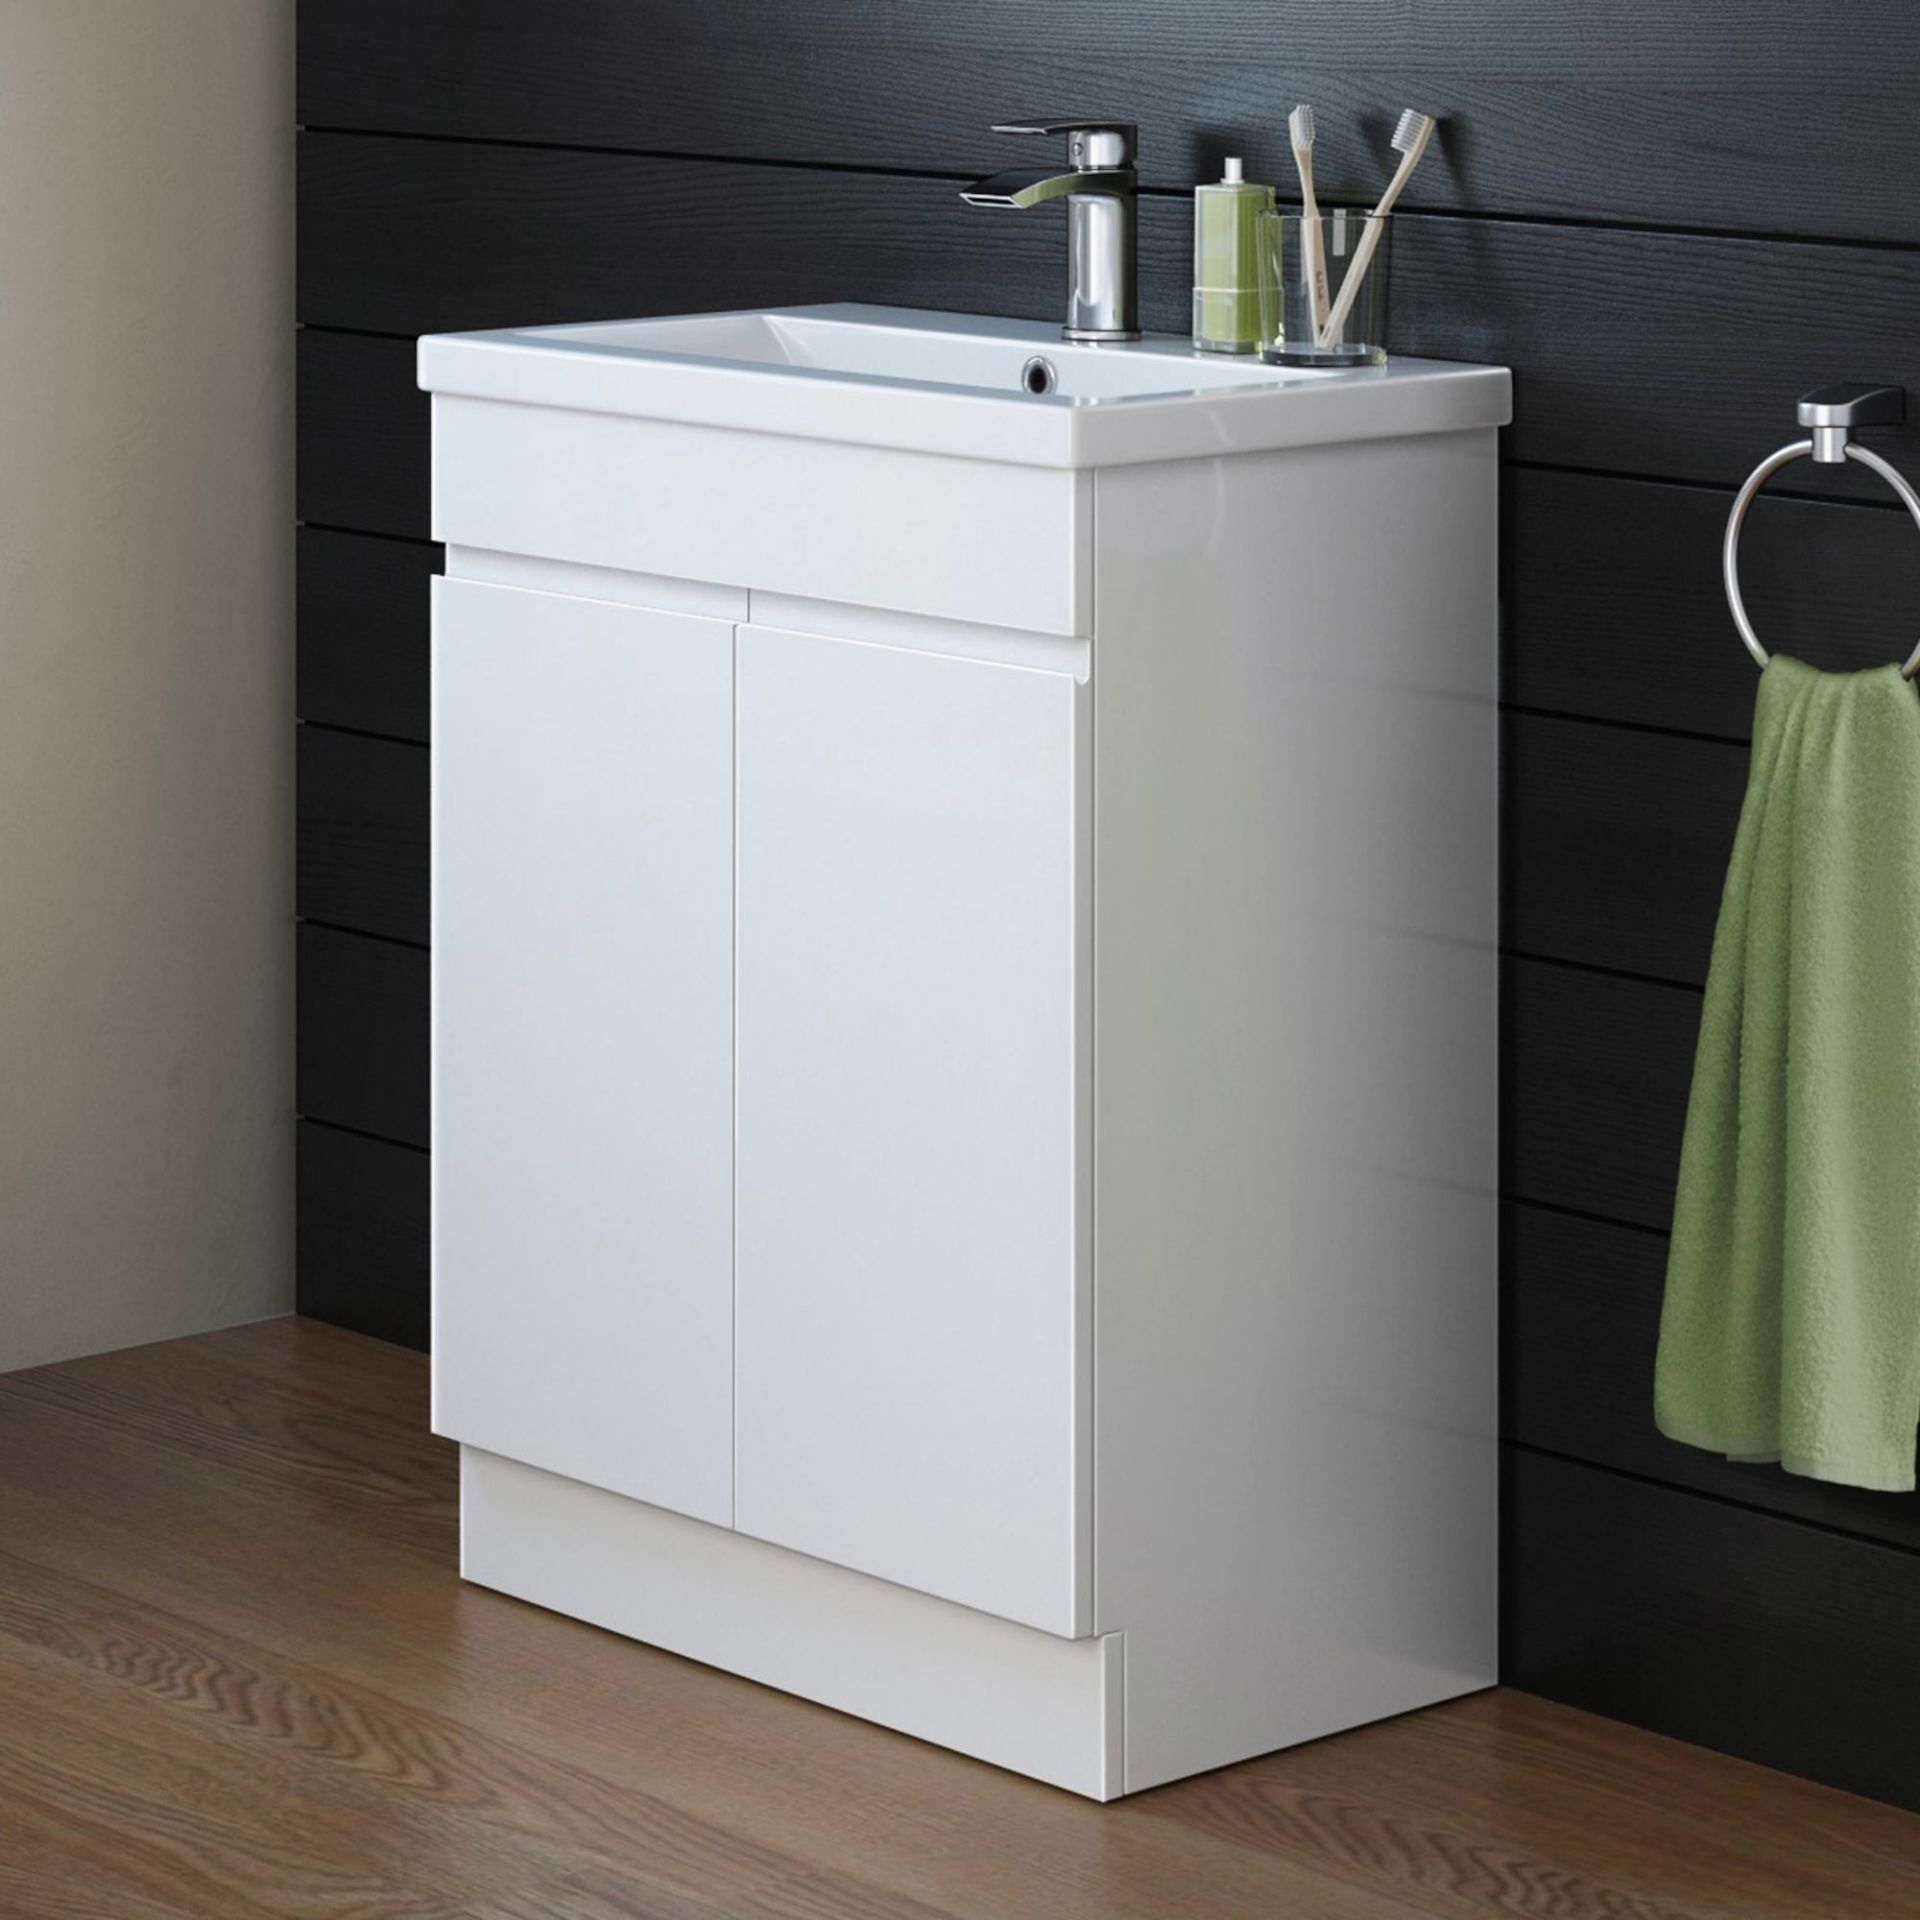 BRAND NEW BOXED 600mm Trent Gloss White Sink Cabinet - Floor Standing.RRP £499.99.Comes comple...